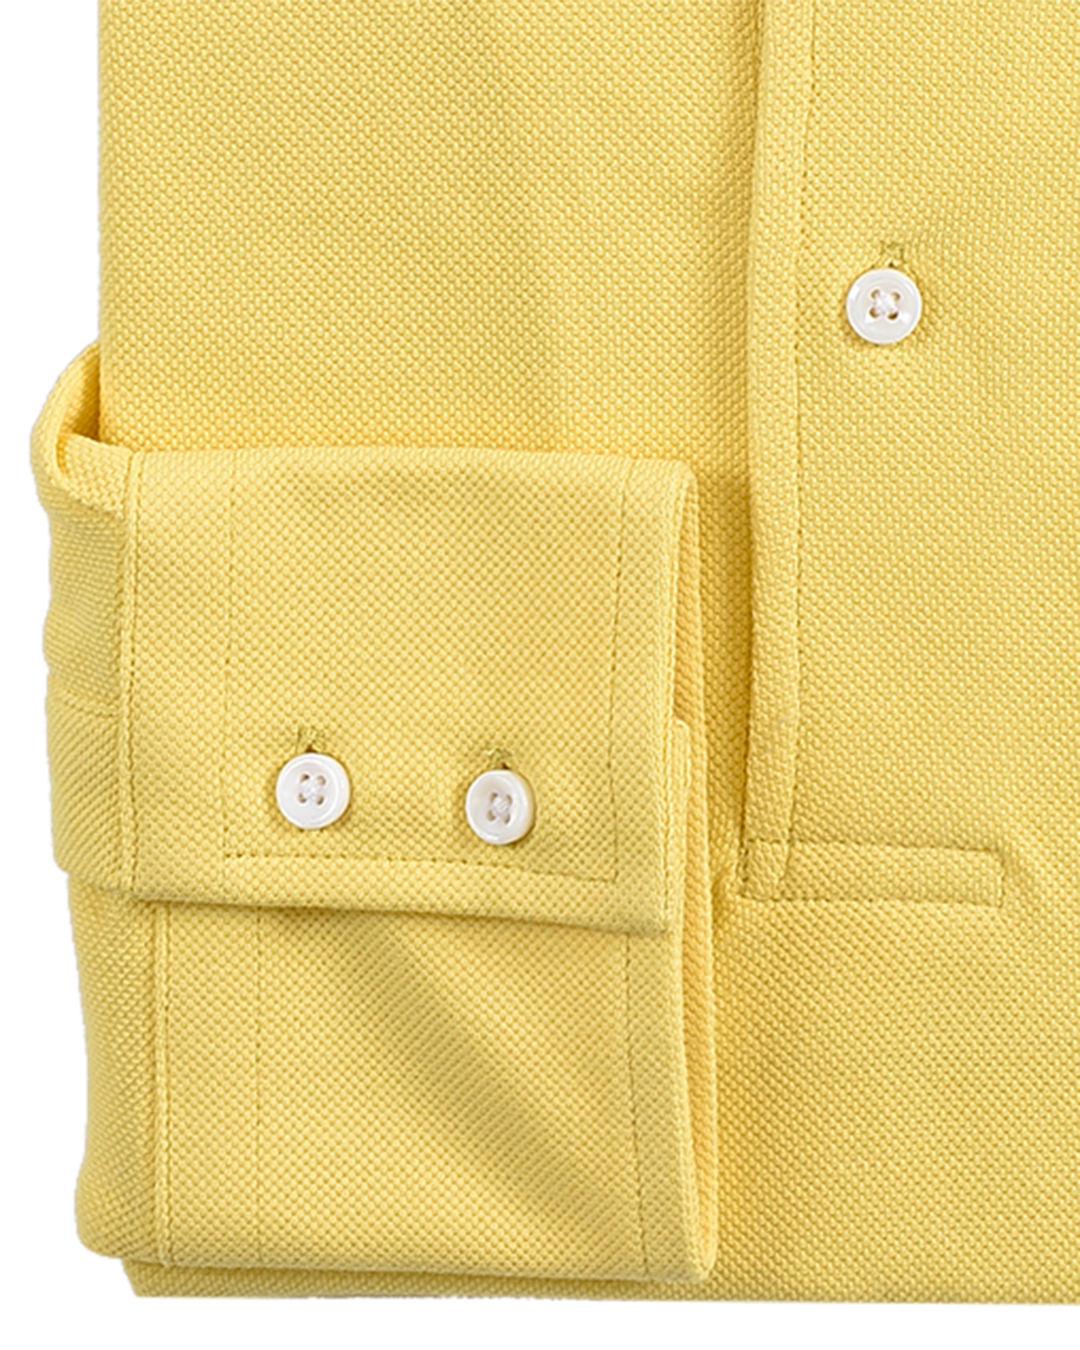 Cuff of the custom oxford polo shirt for men by Luxire in light yellow